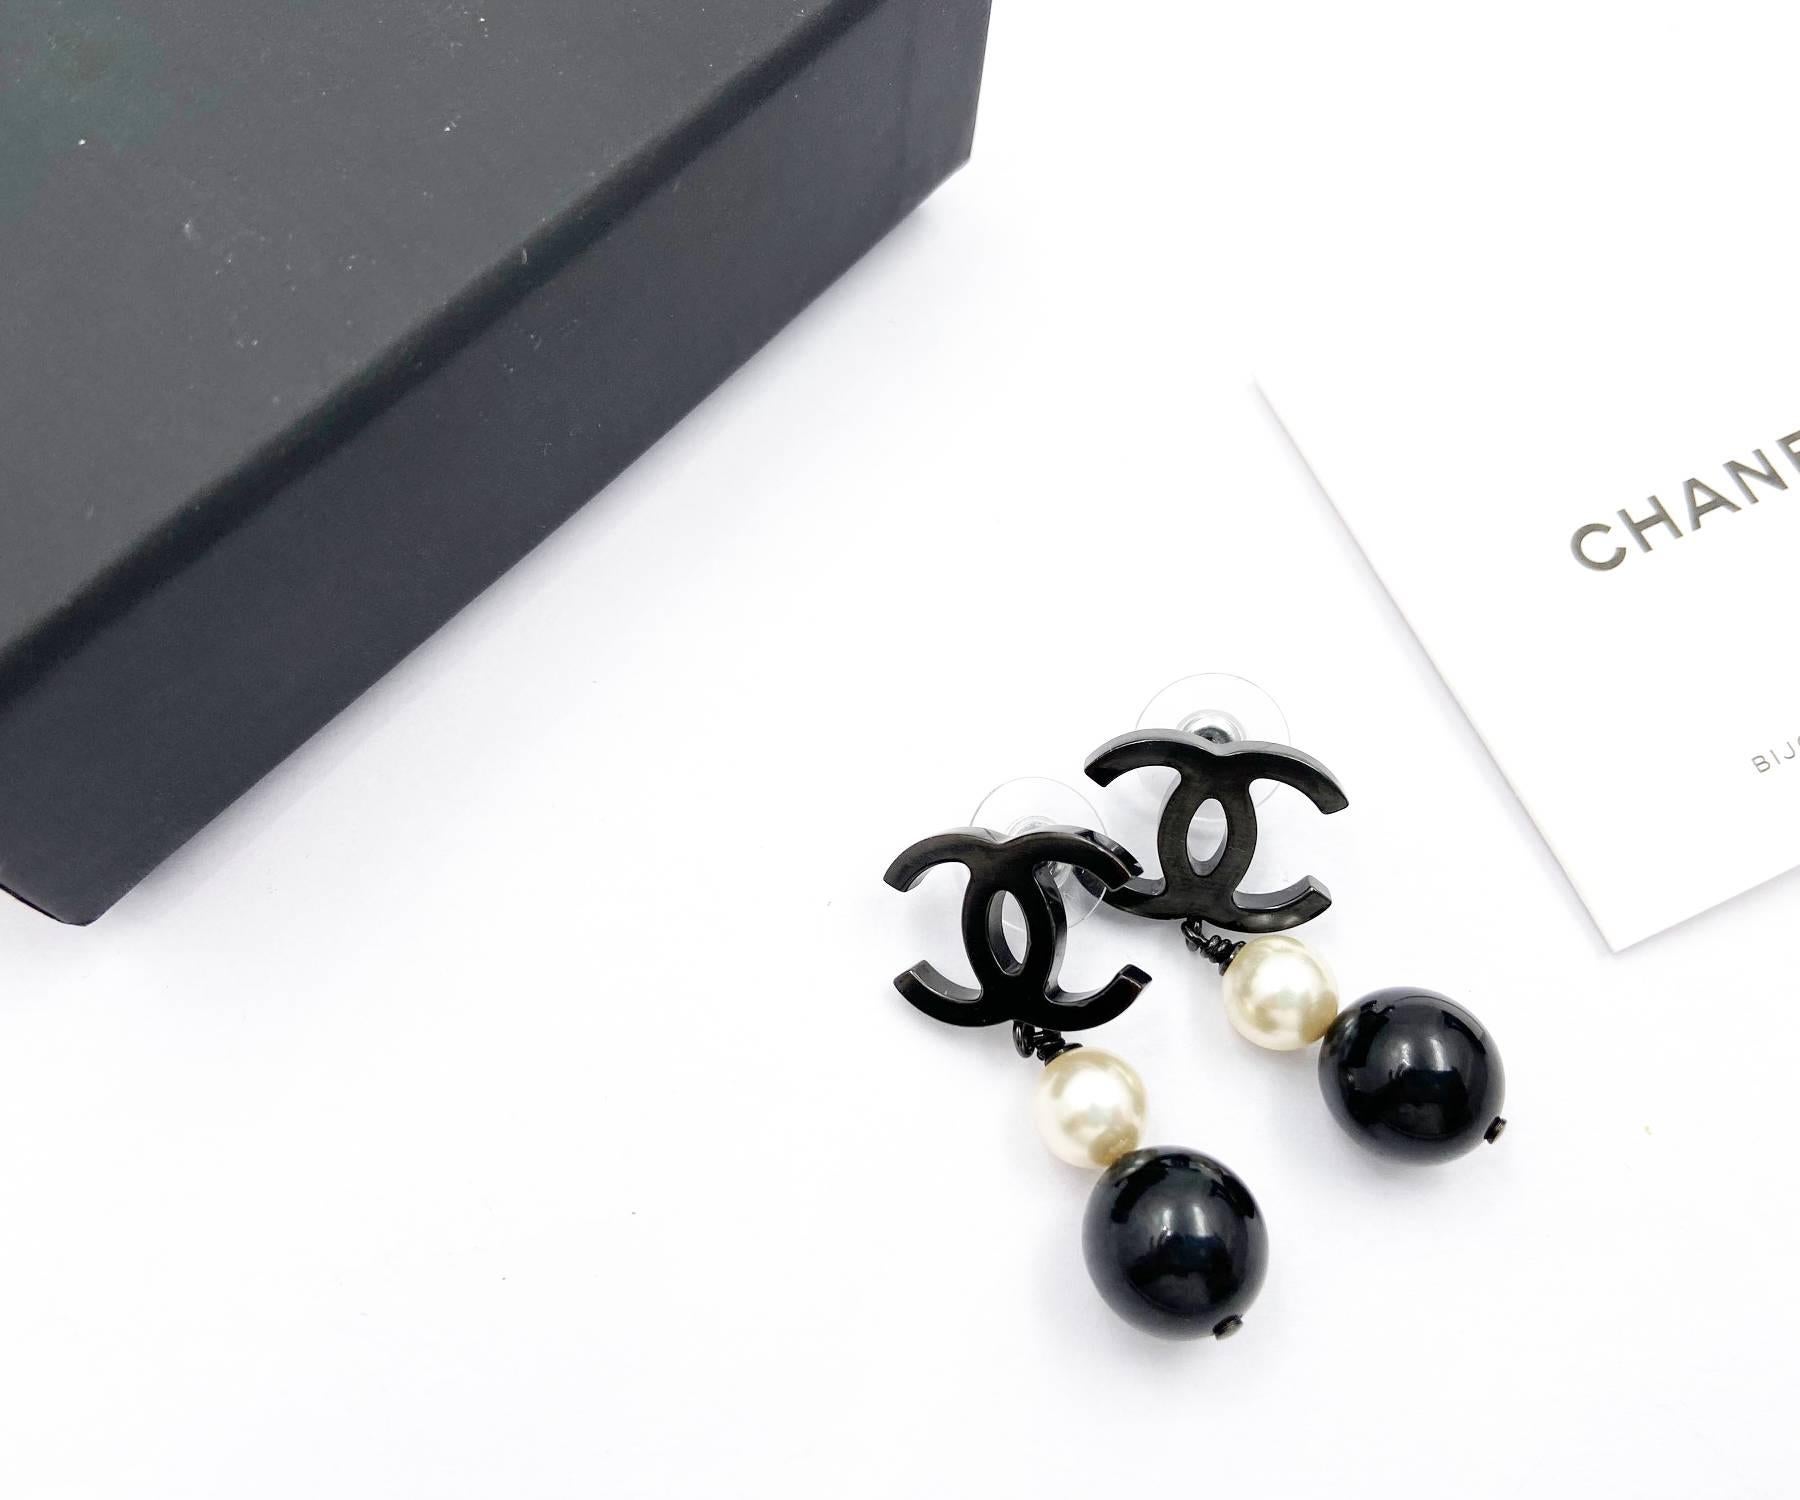 Chanel Black CC Pearl Black Bead Dangle Piercing Earrings

*Marked 14
*Made in Italy
*Comes with the original box and pouch

-It is approximately 1.5